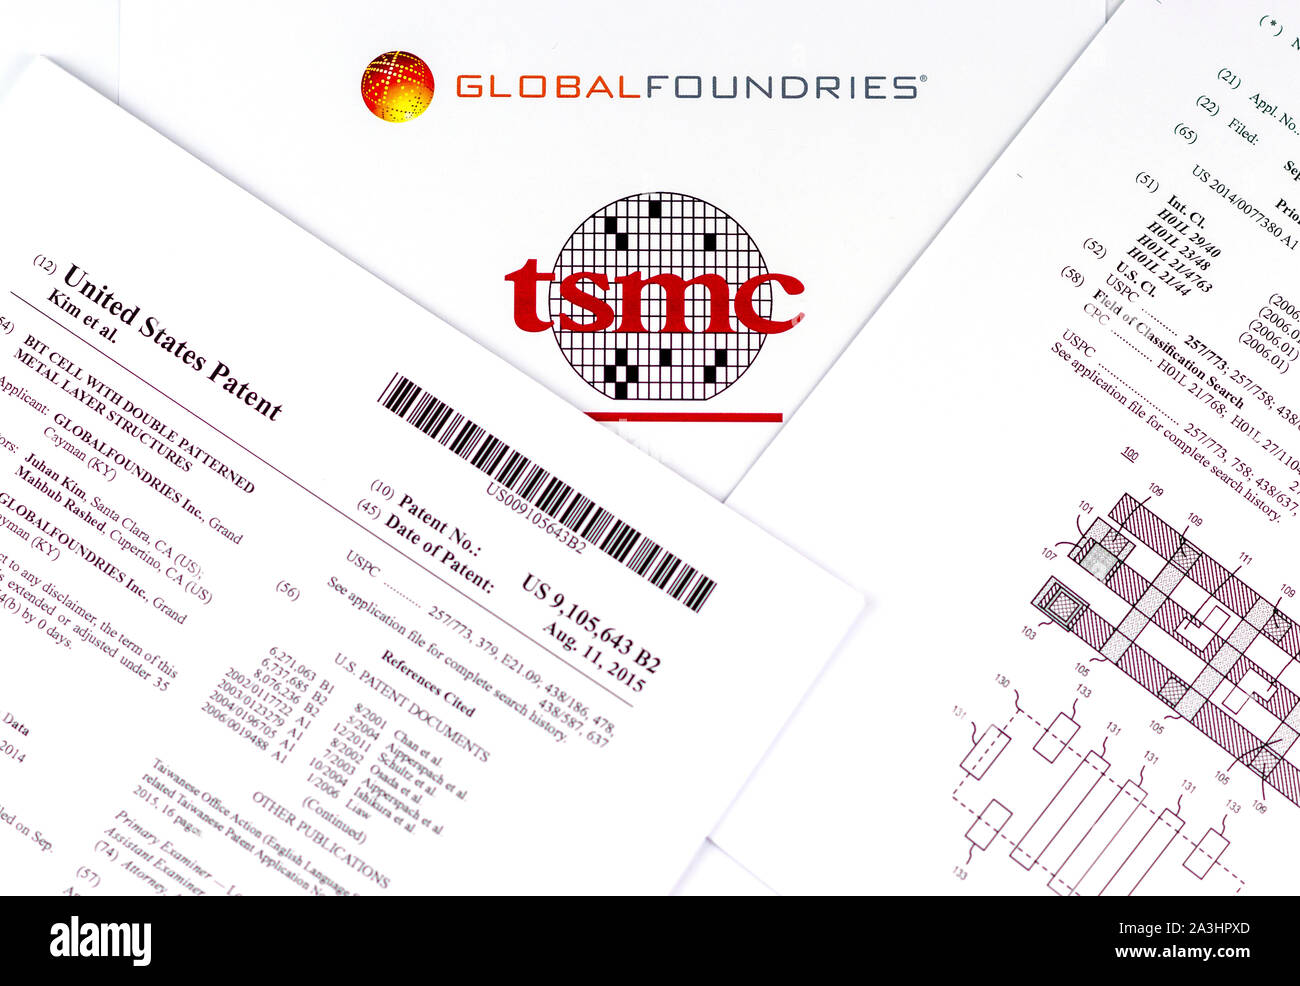 GLOBAL FOUNDRIES vs. TSMC. Logos of the semiconductor companies and two printed US patents which are claimed to be infringed by TSMC. Stock Photo